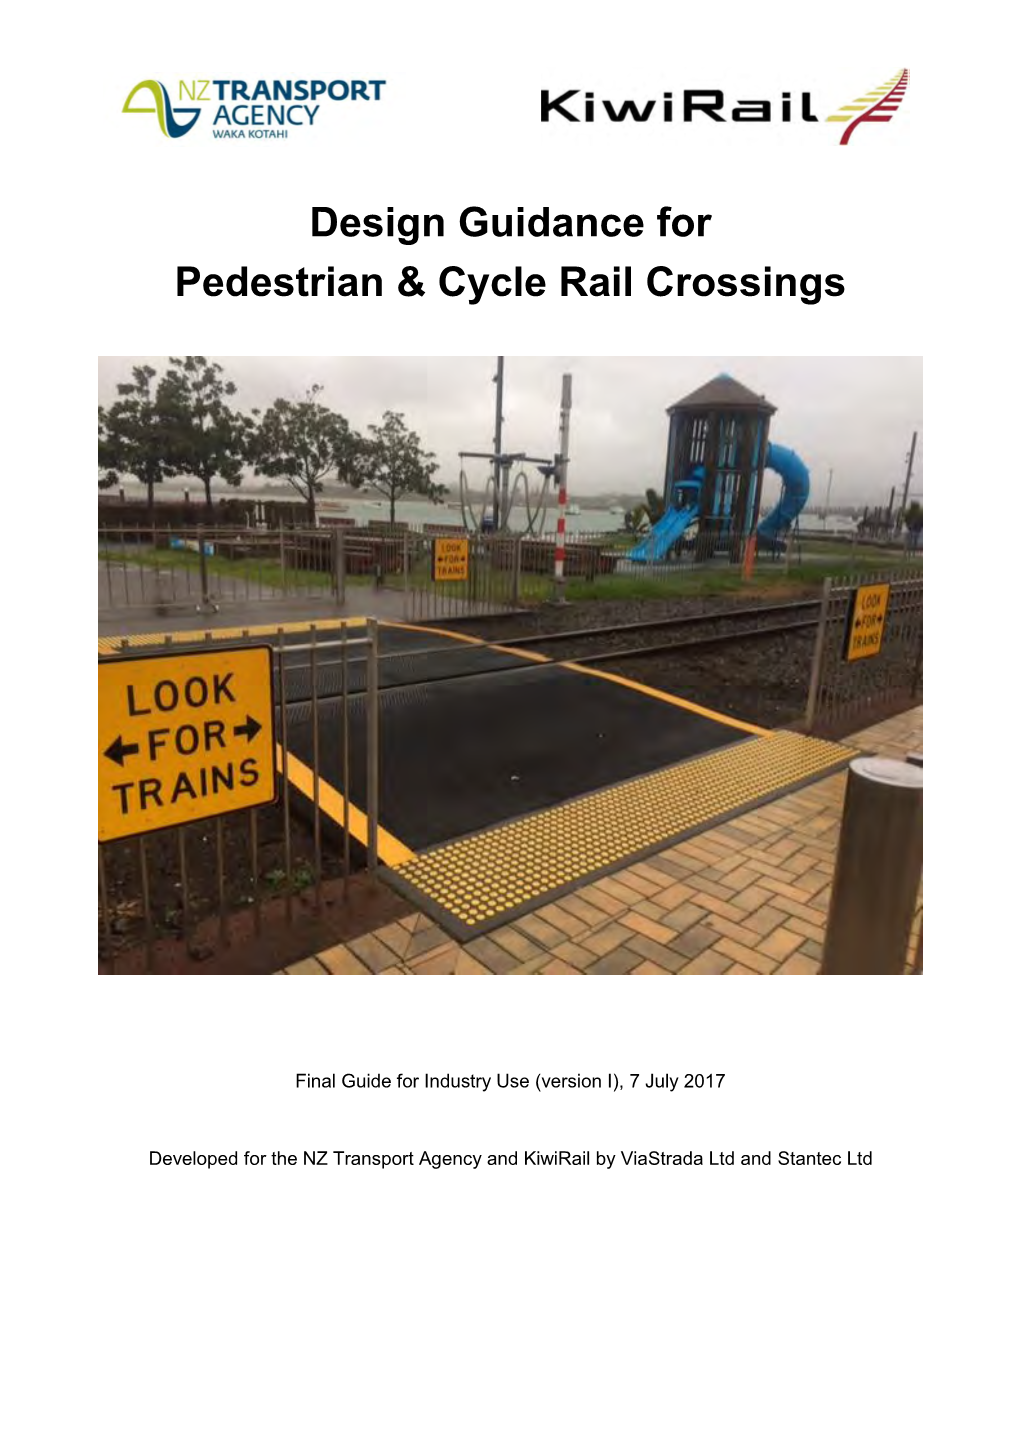 Design Guidance for Pedestrian & Cycle Rail Crossings